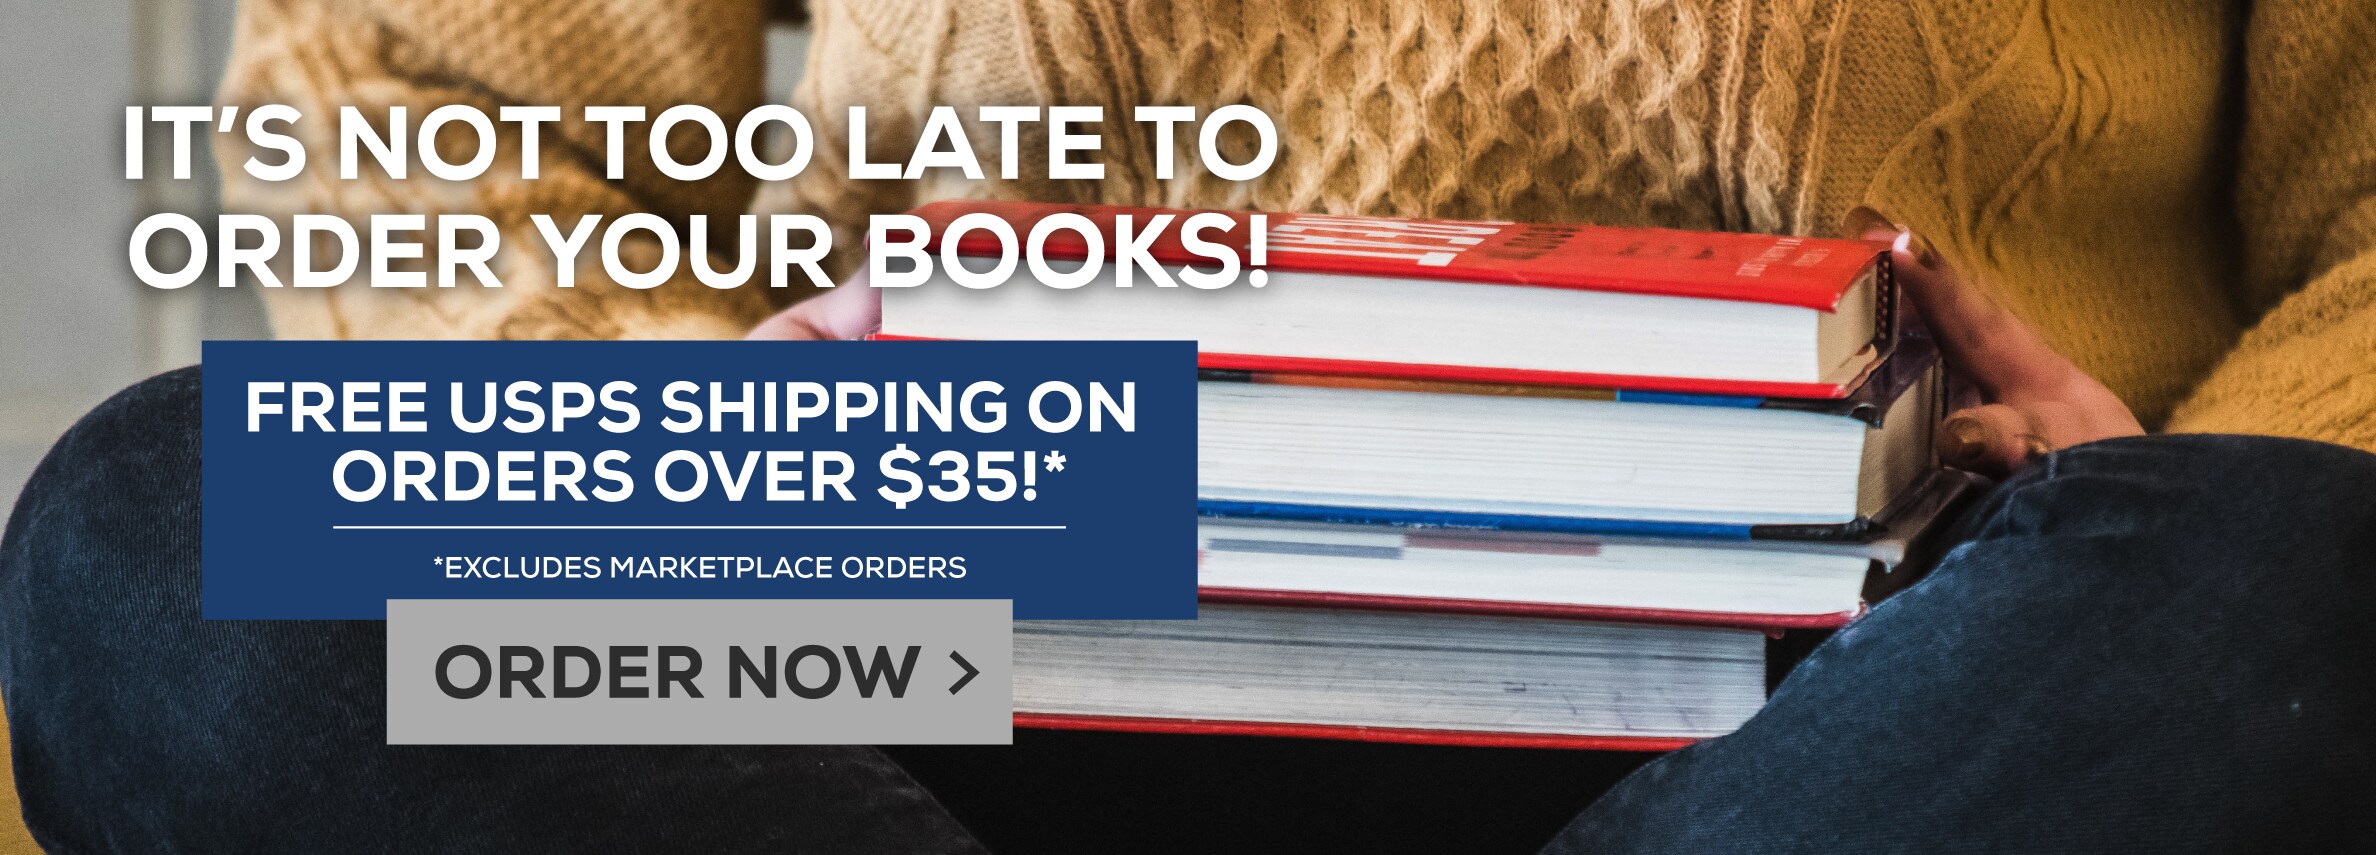 ItÃ¢â‚¬â„¢s not too late to order your books!  Free shipping on all orders over $35!* *Excludes Marketplace Purchases Order Now.